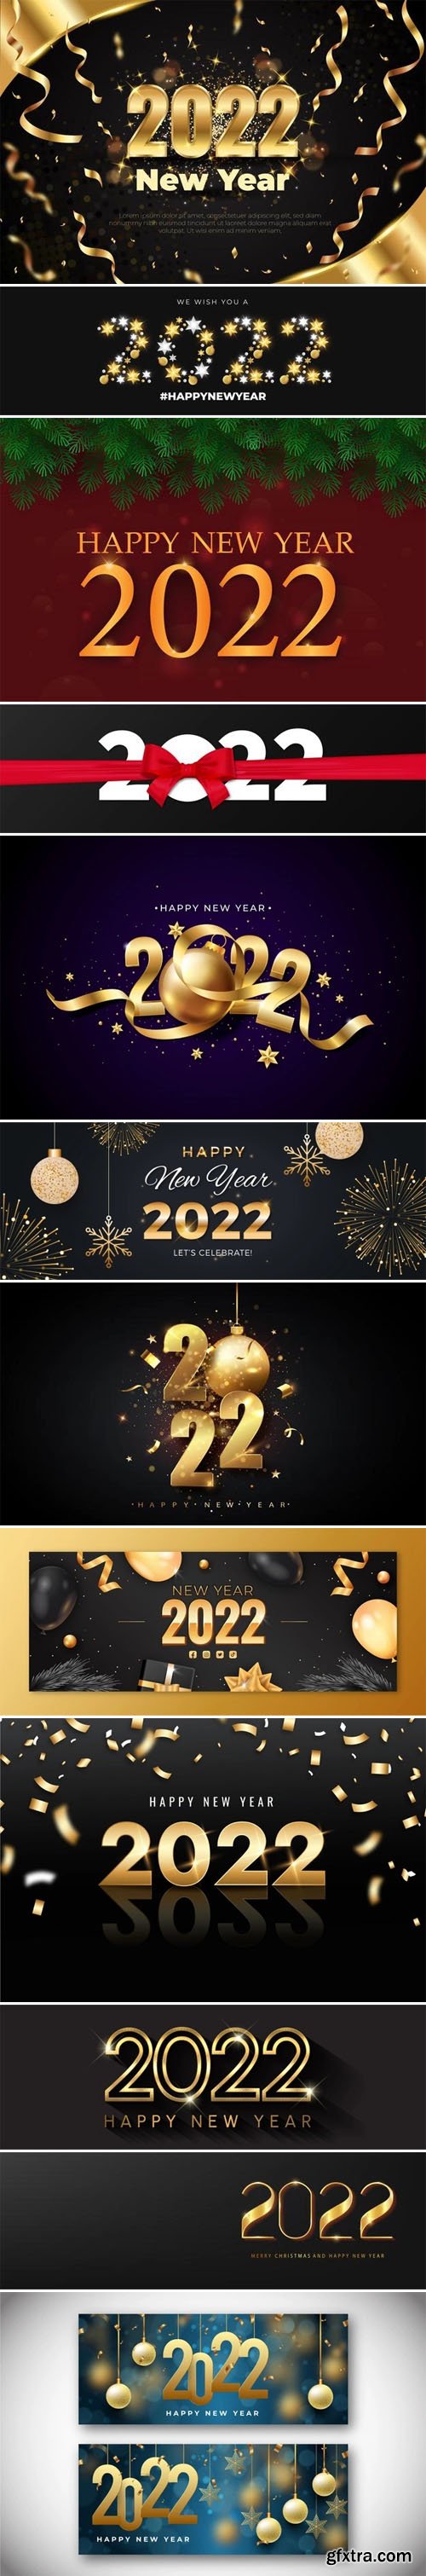 Happy New Year 2022 Banners & Backgrounds Collection Vol.3 - 10+ Vector Templates